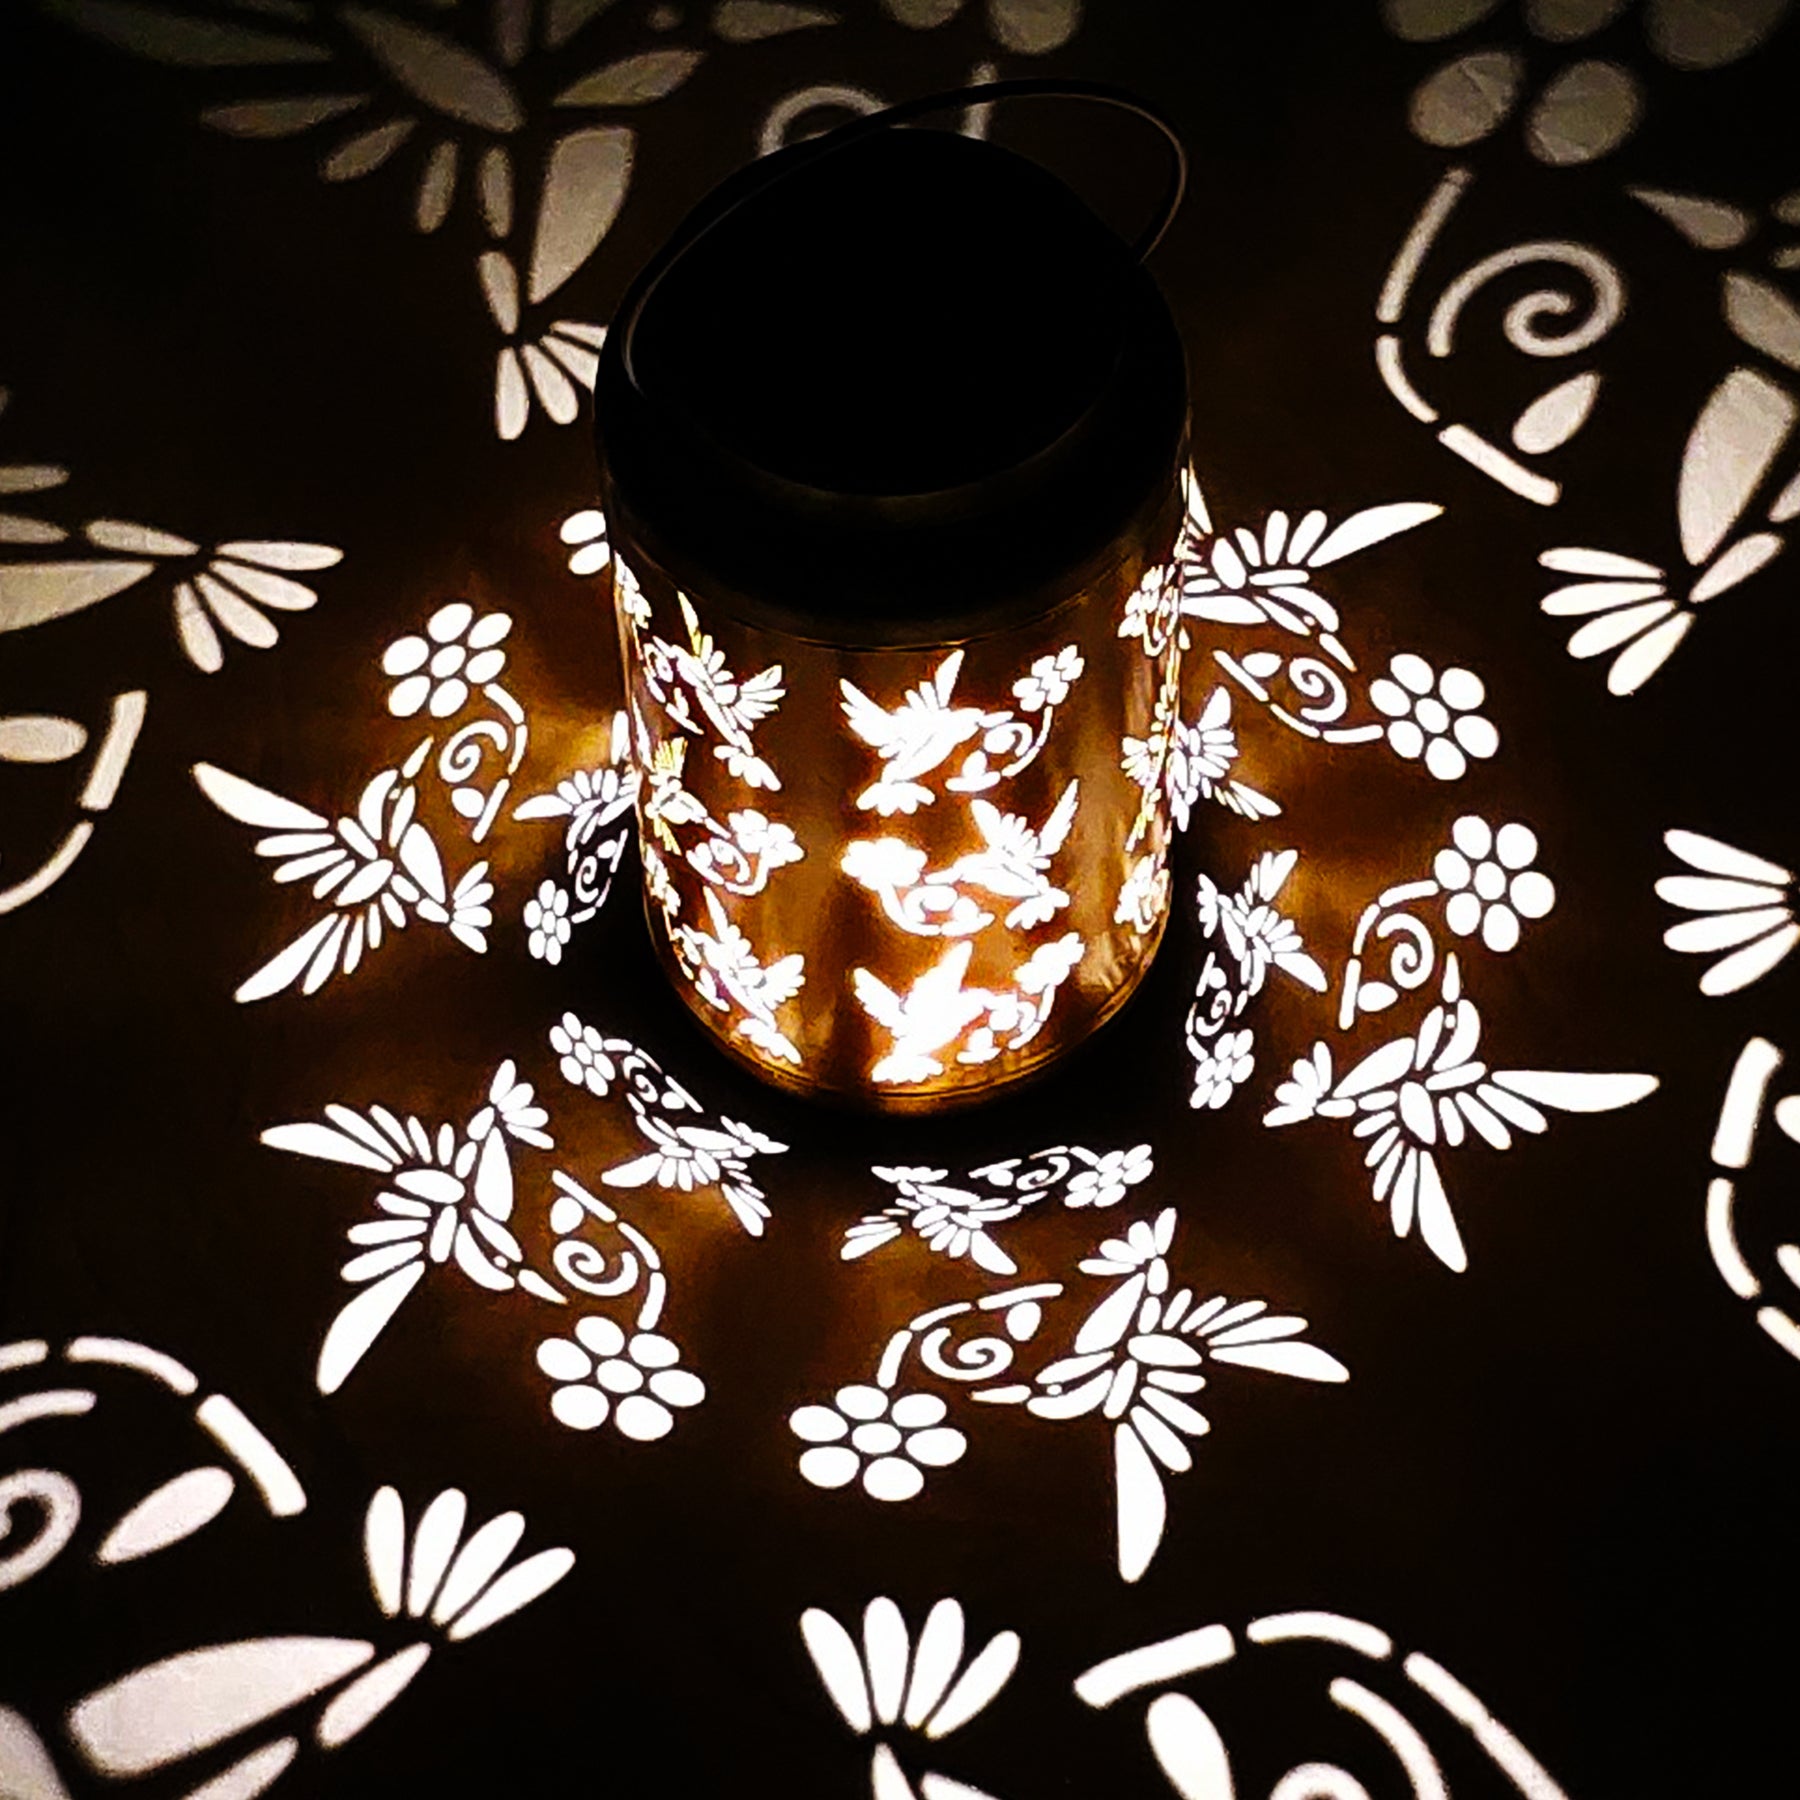 Bliss Outdoors 9-inch Decorative Solar LED Lantern with Unique Humming Bird Design turned on and creating a cool light pattern on the surface around it.